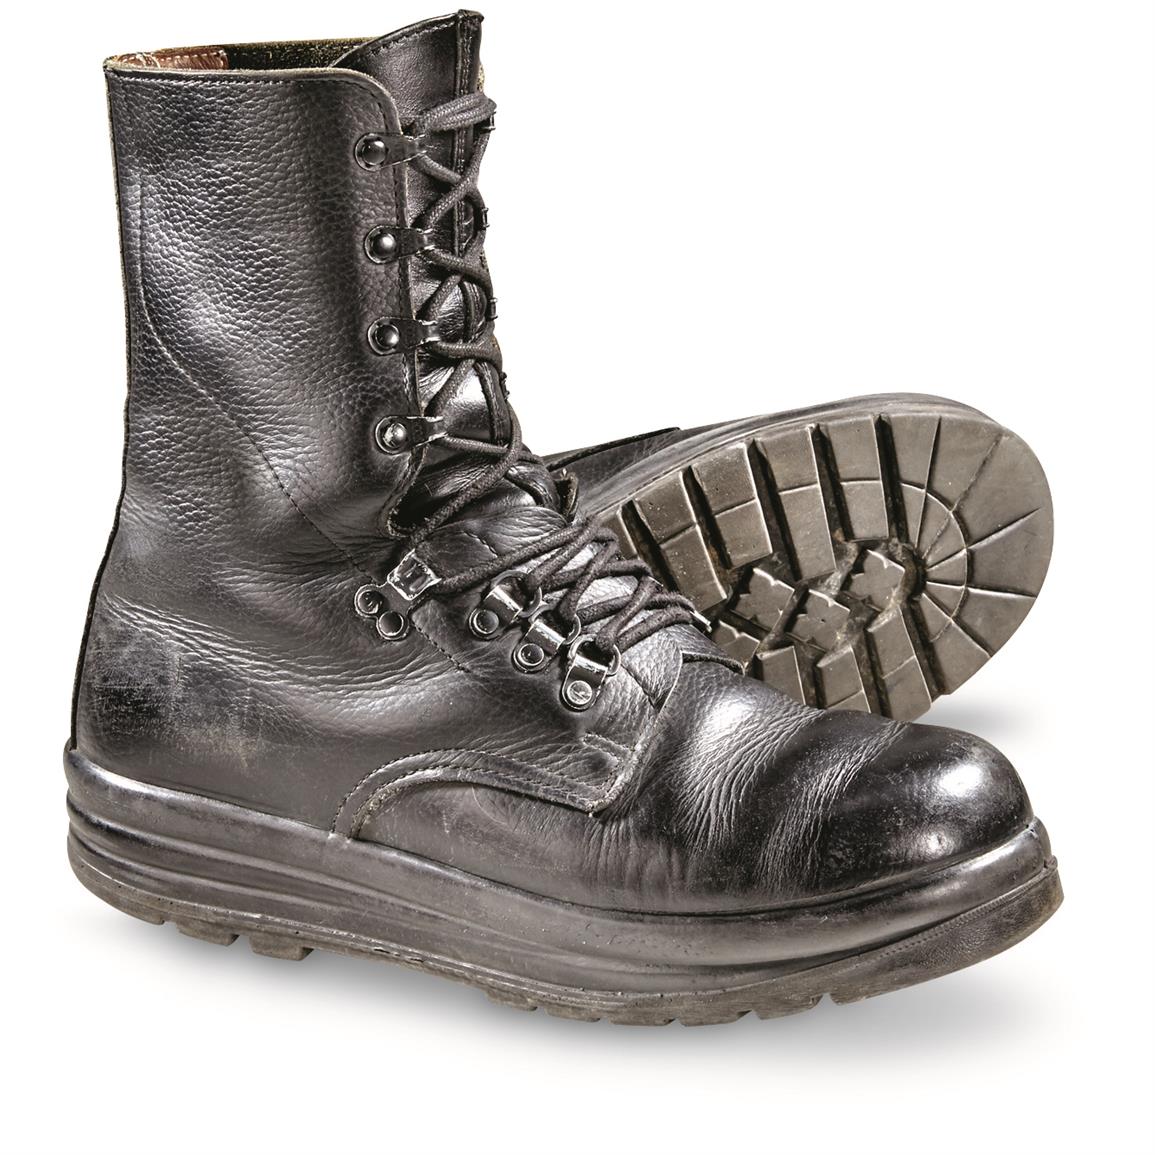 Swiss Military Surplus Waterproof Leather Combat Boots, Used - 667179 ...